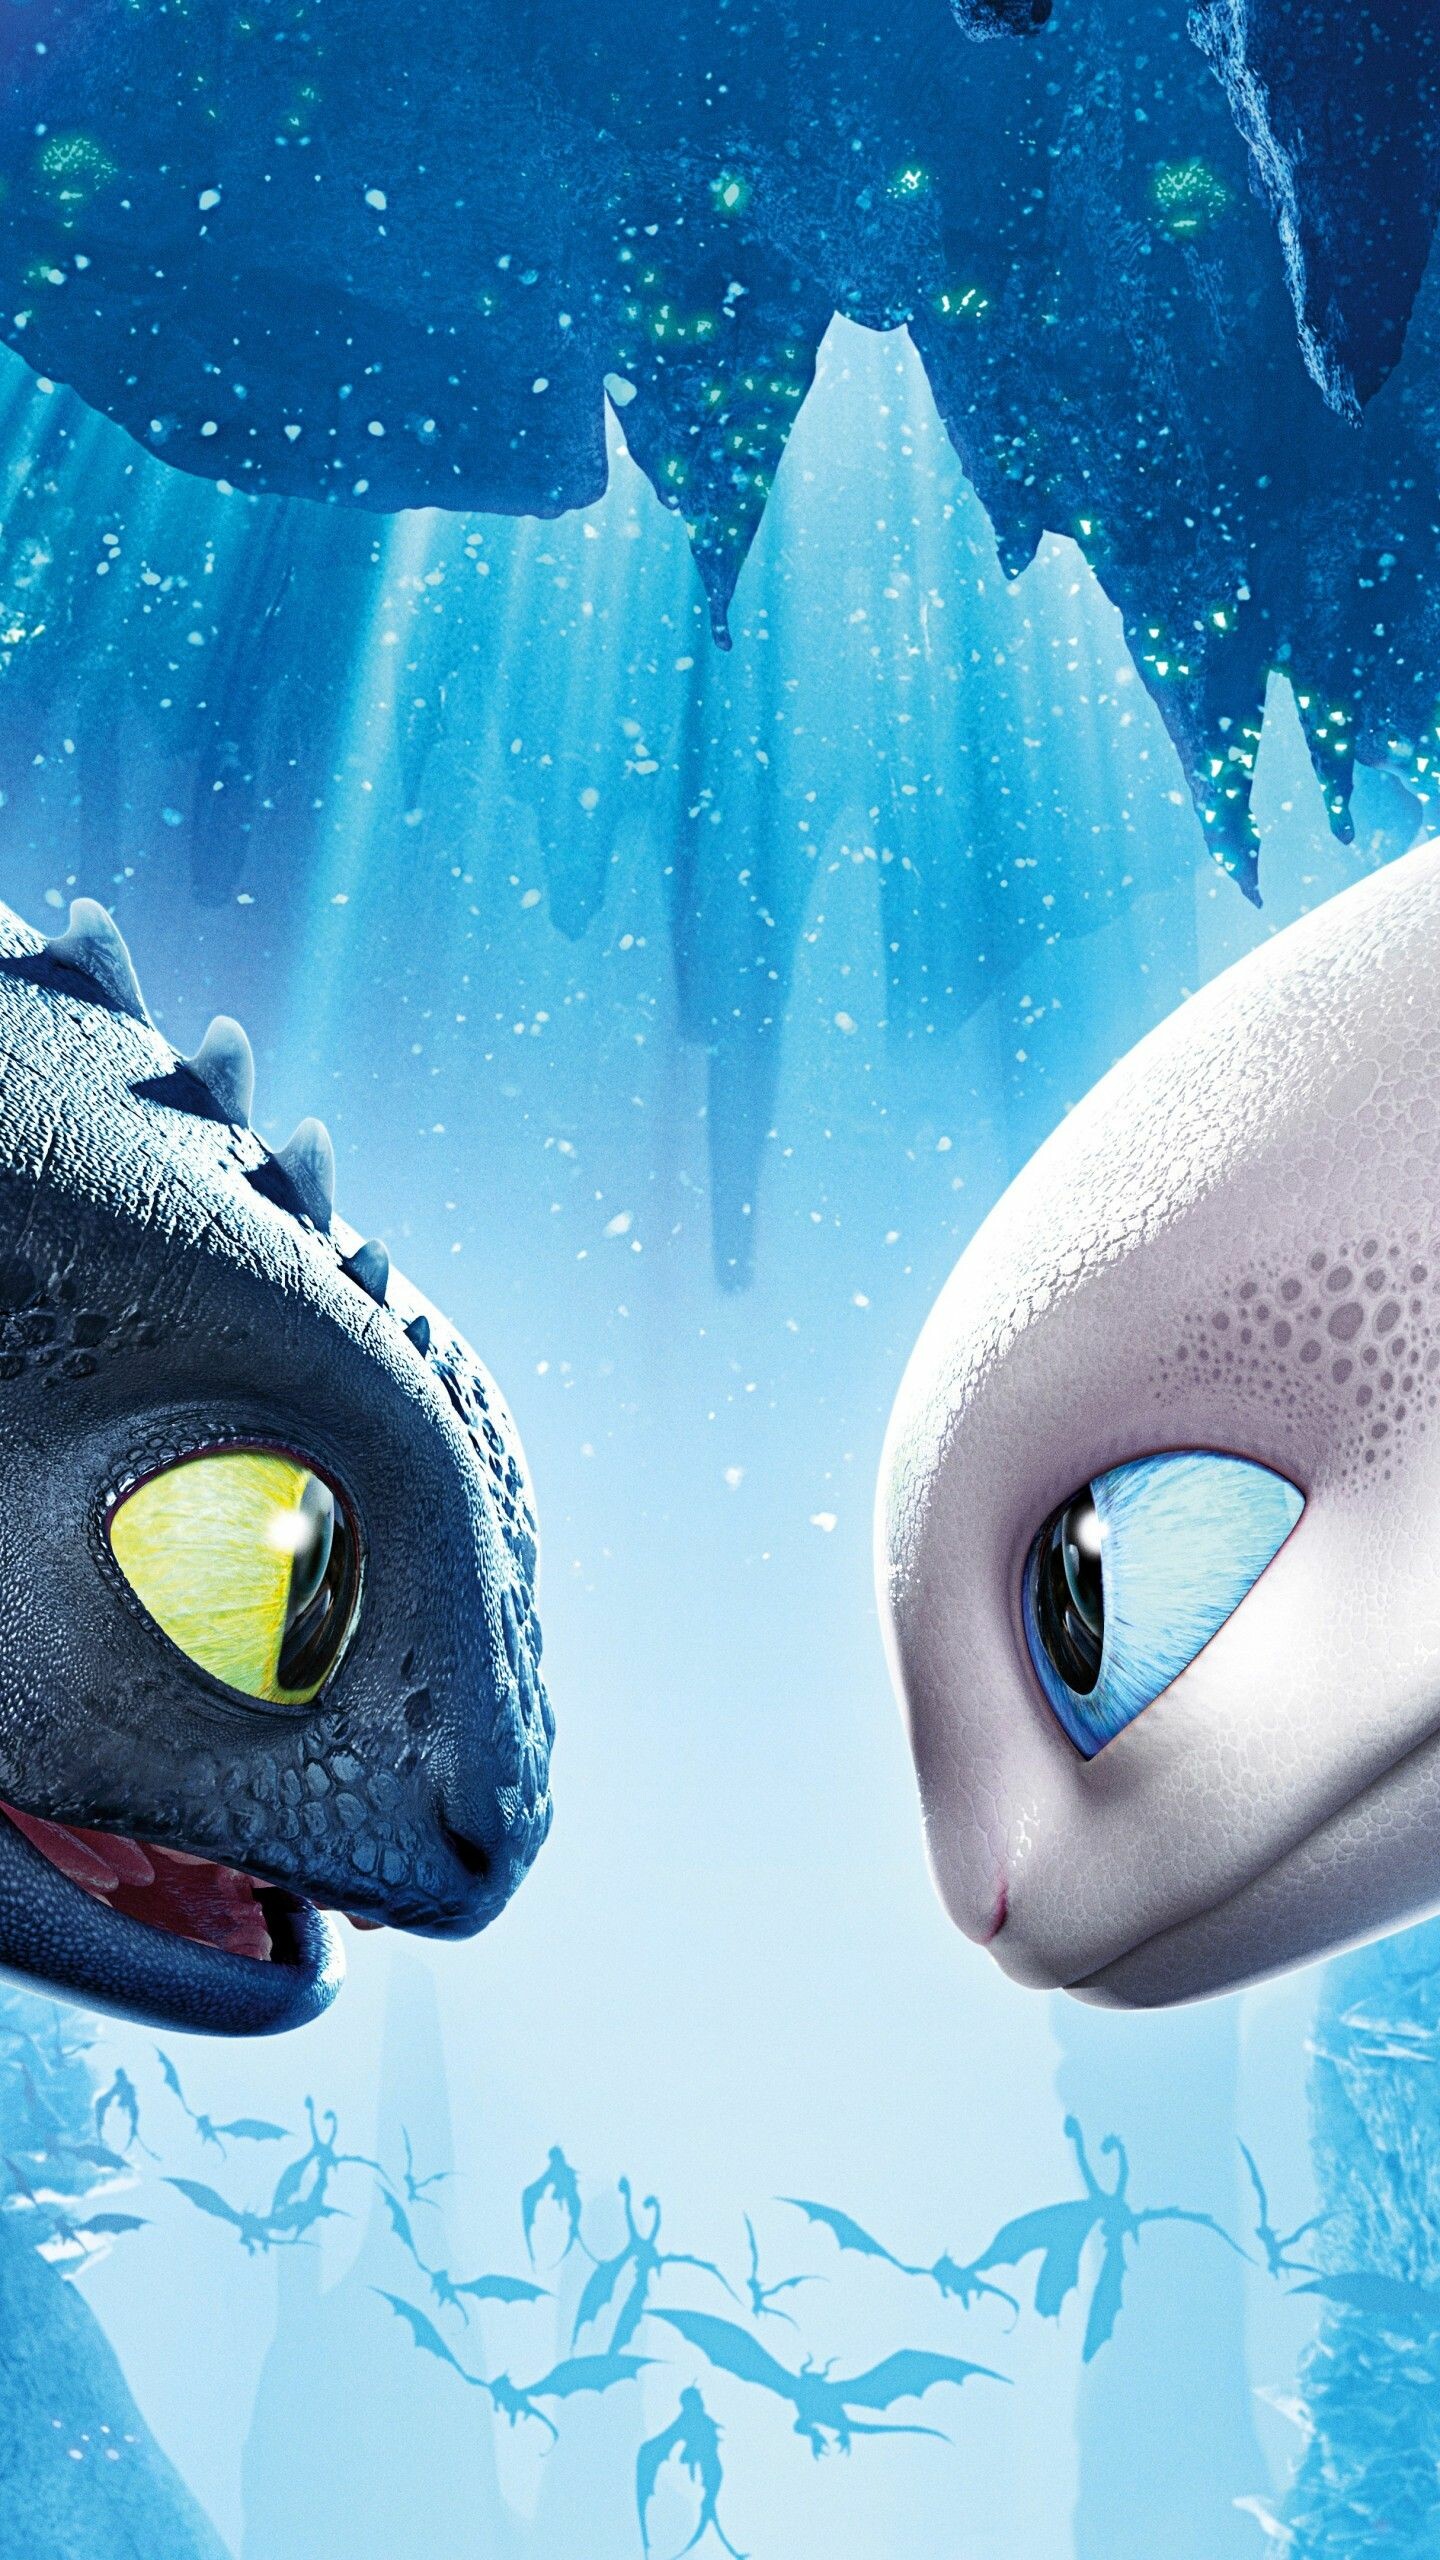 How to Train Your Dragon: Toothless, Hiccup's pet, Award-winning story of Vikings. 1440x2560 HD Background.